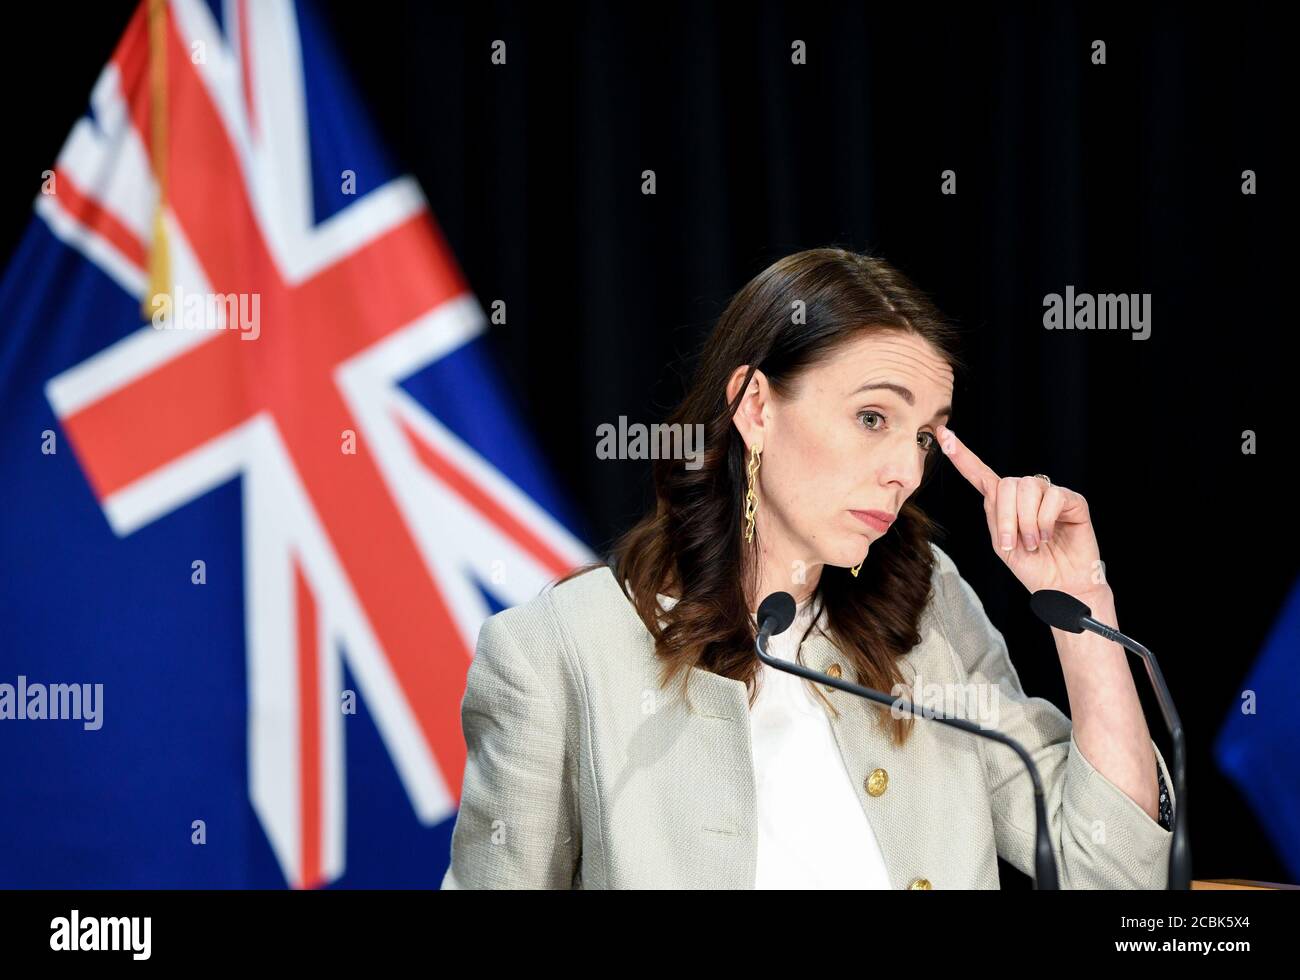 Wellington, New Zealand. 14th Aug, 2020. New Zealand Prime Minister Jacinda Ardern attends a press conference in Wellington, New Zealand, Aug. 14, 2020. New Zealand's largest city Auckland will remain in COVID-19 Alert Level 3 for 12 more days, with the rest of the country staying in Alert Level 2, as there are currently 36 active cases, 17 of which are linked to the recent community transmission in Auckland. Credit: Guo Lei/Xinhua/Alamy Live News Stock Photo